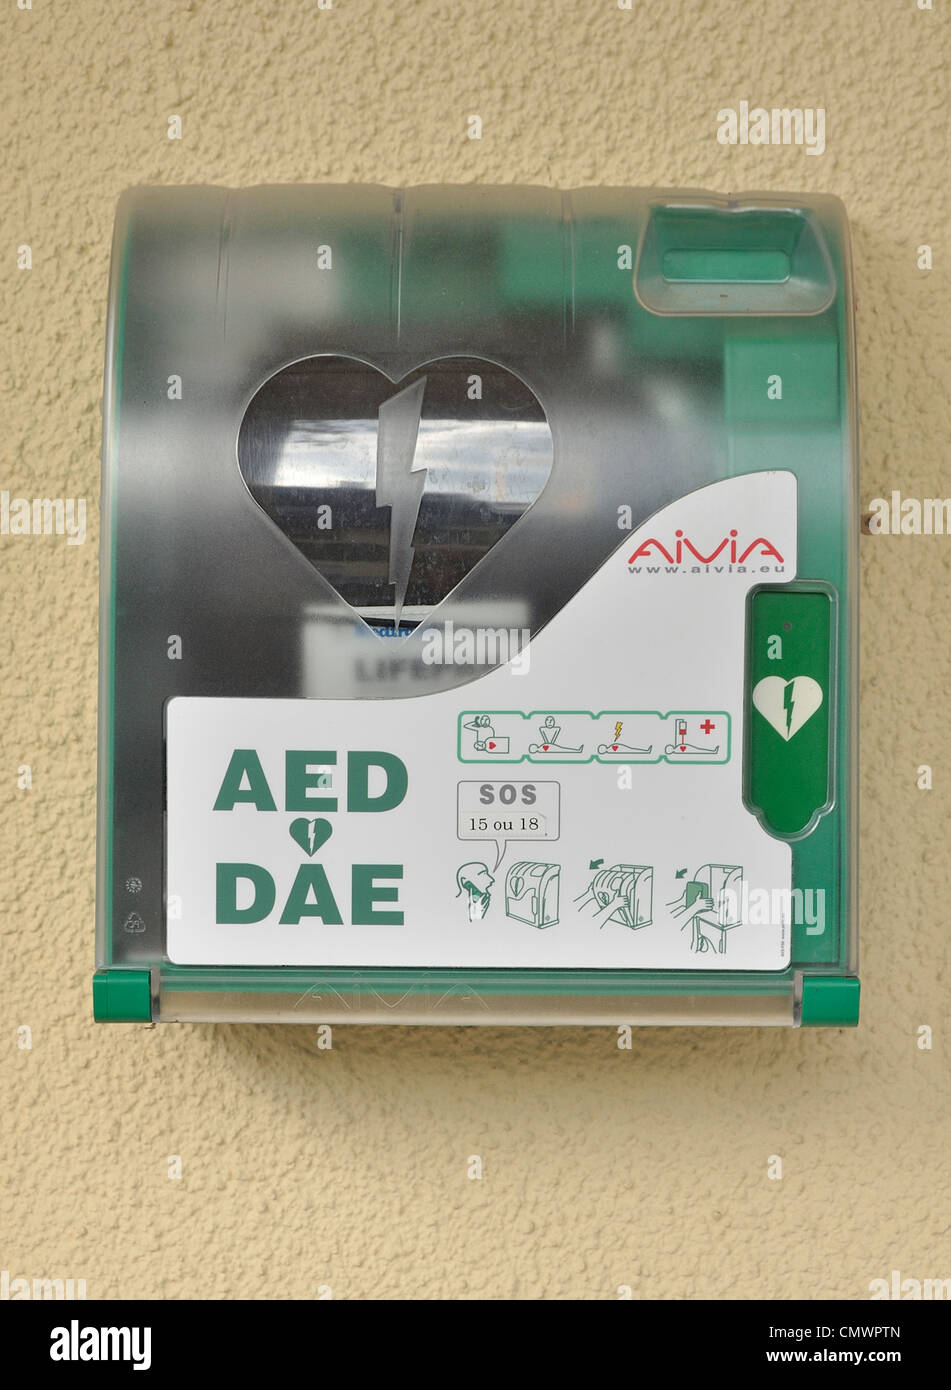 Defibrillator on a public place, equipment is used to analyse the heart rate of a cardiac arrest victim. Stock Photo